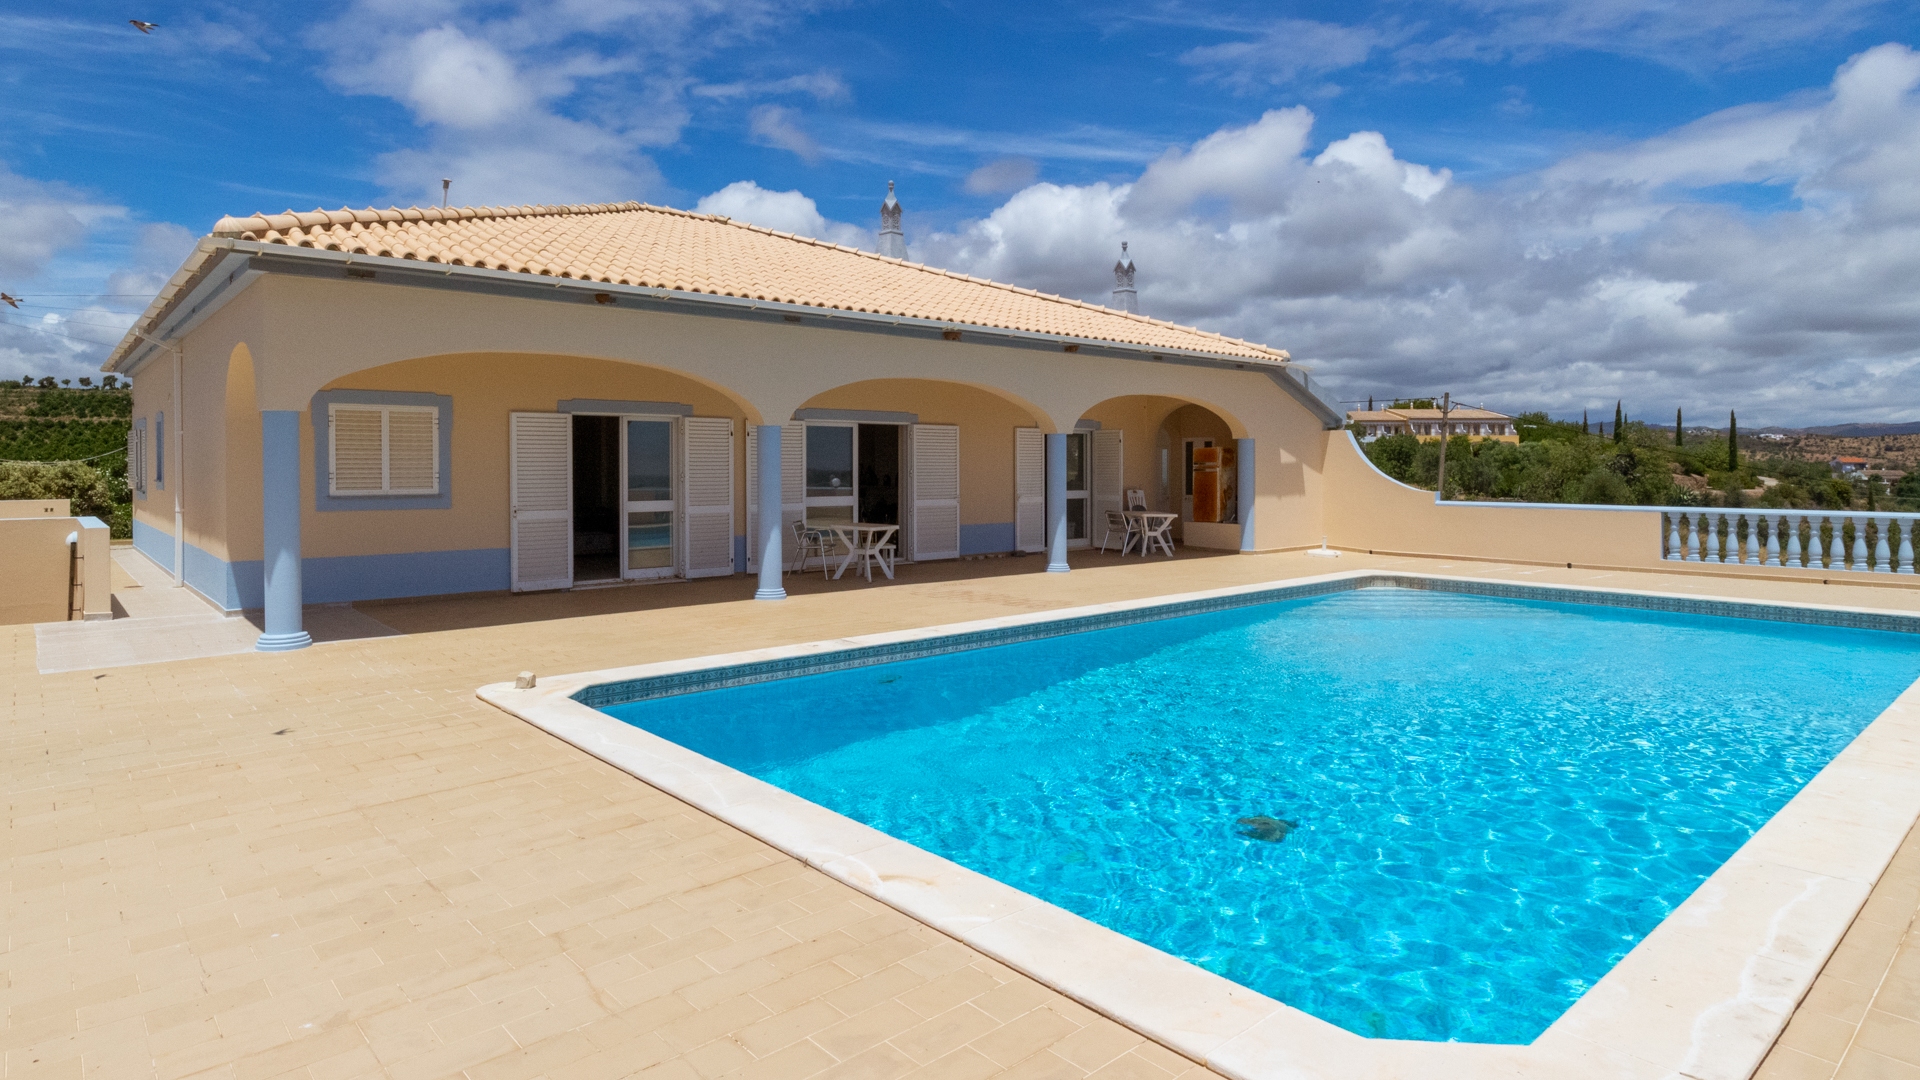 Charming 4-Bedroom Villa with Swimming Pool and Sea Views, close to Tavira | TV1724 This villa has a large swimming pool and nice views of the surrounding countryside. Very quiet location, yet only 10 minutes’ drive from Tavira.